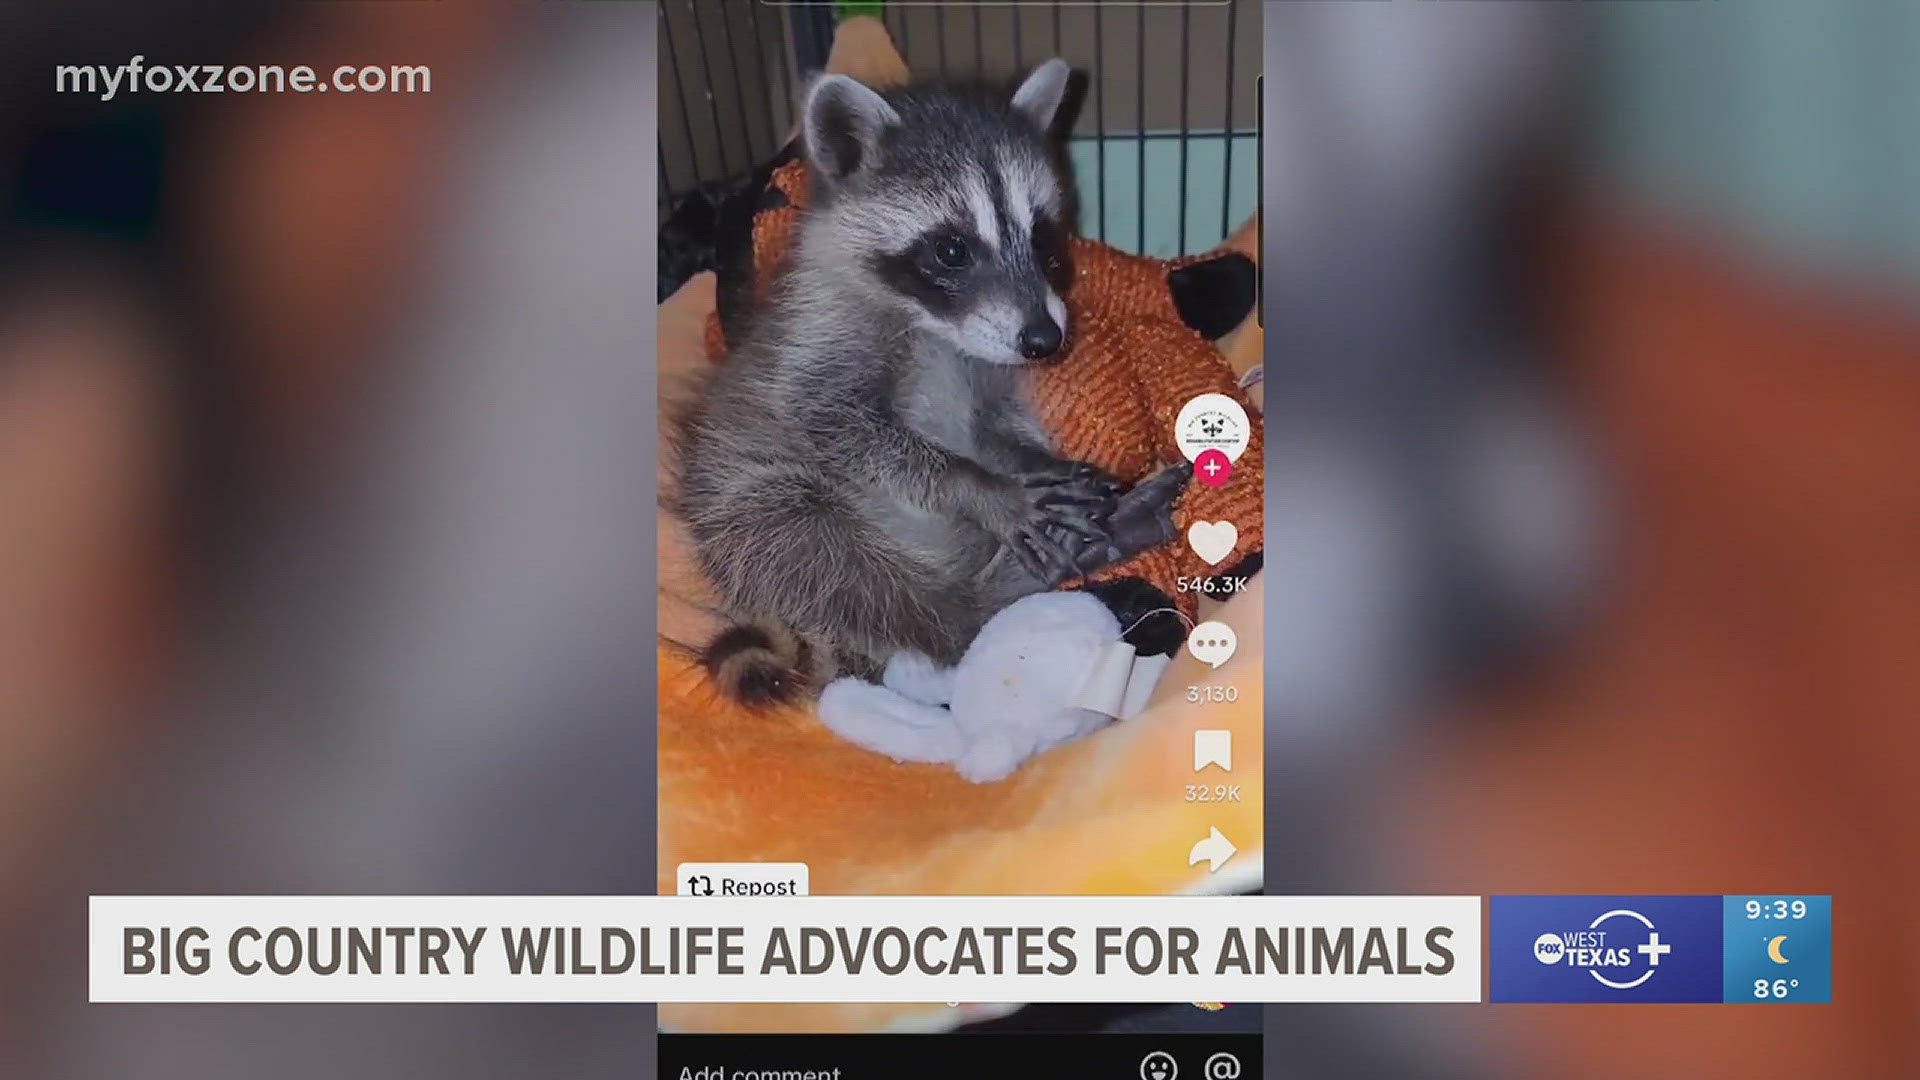 The rescue uses social media to educate West Texans about the wildlife in our backyards.